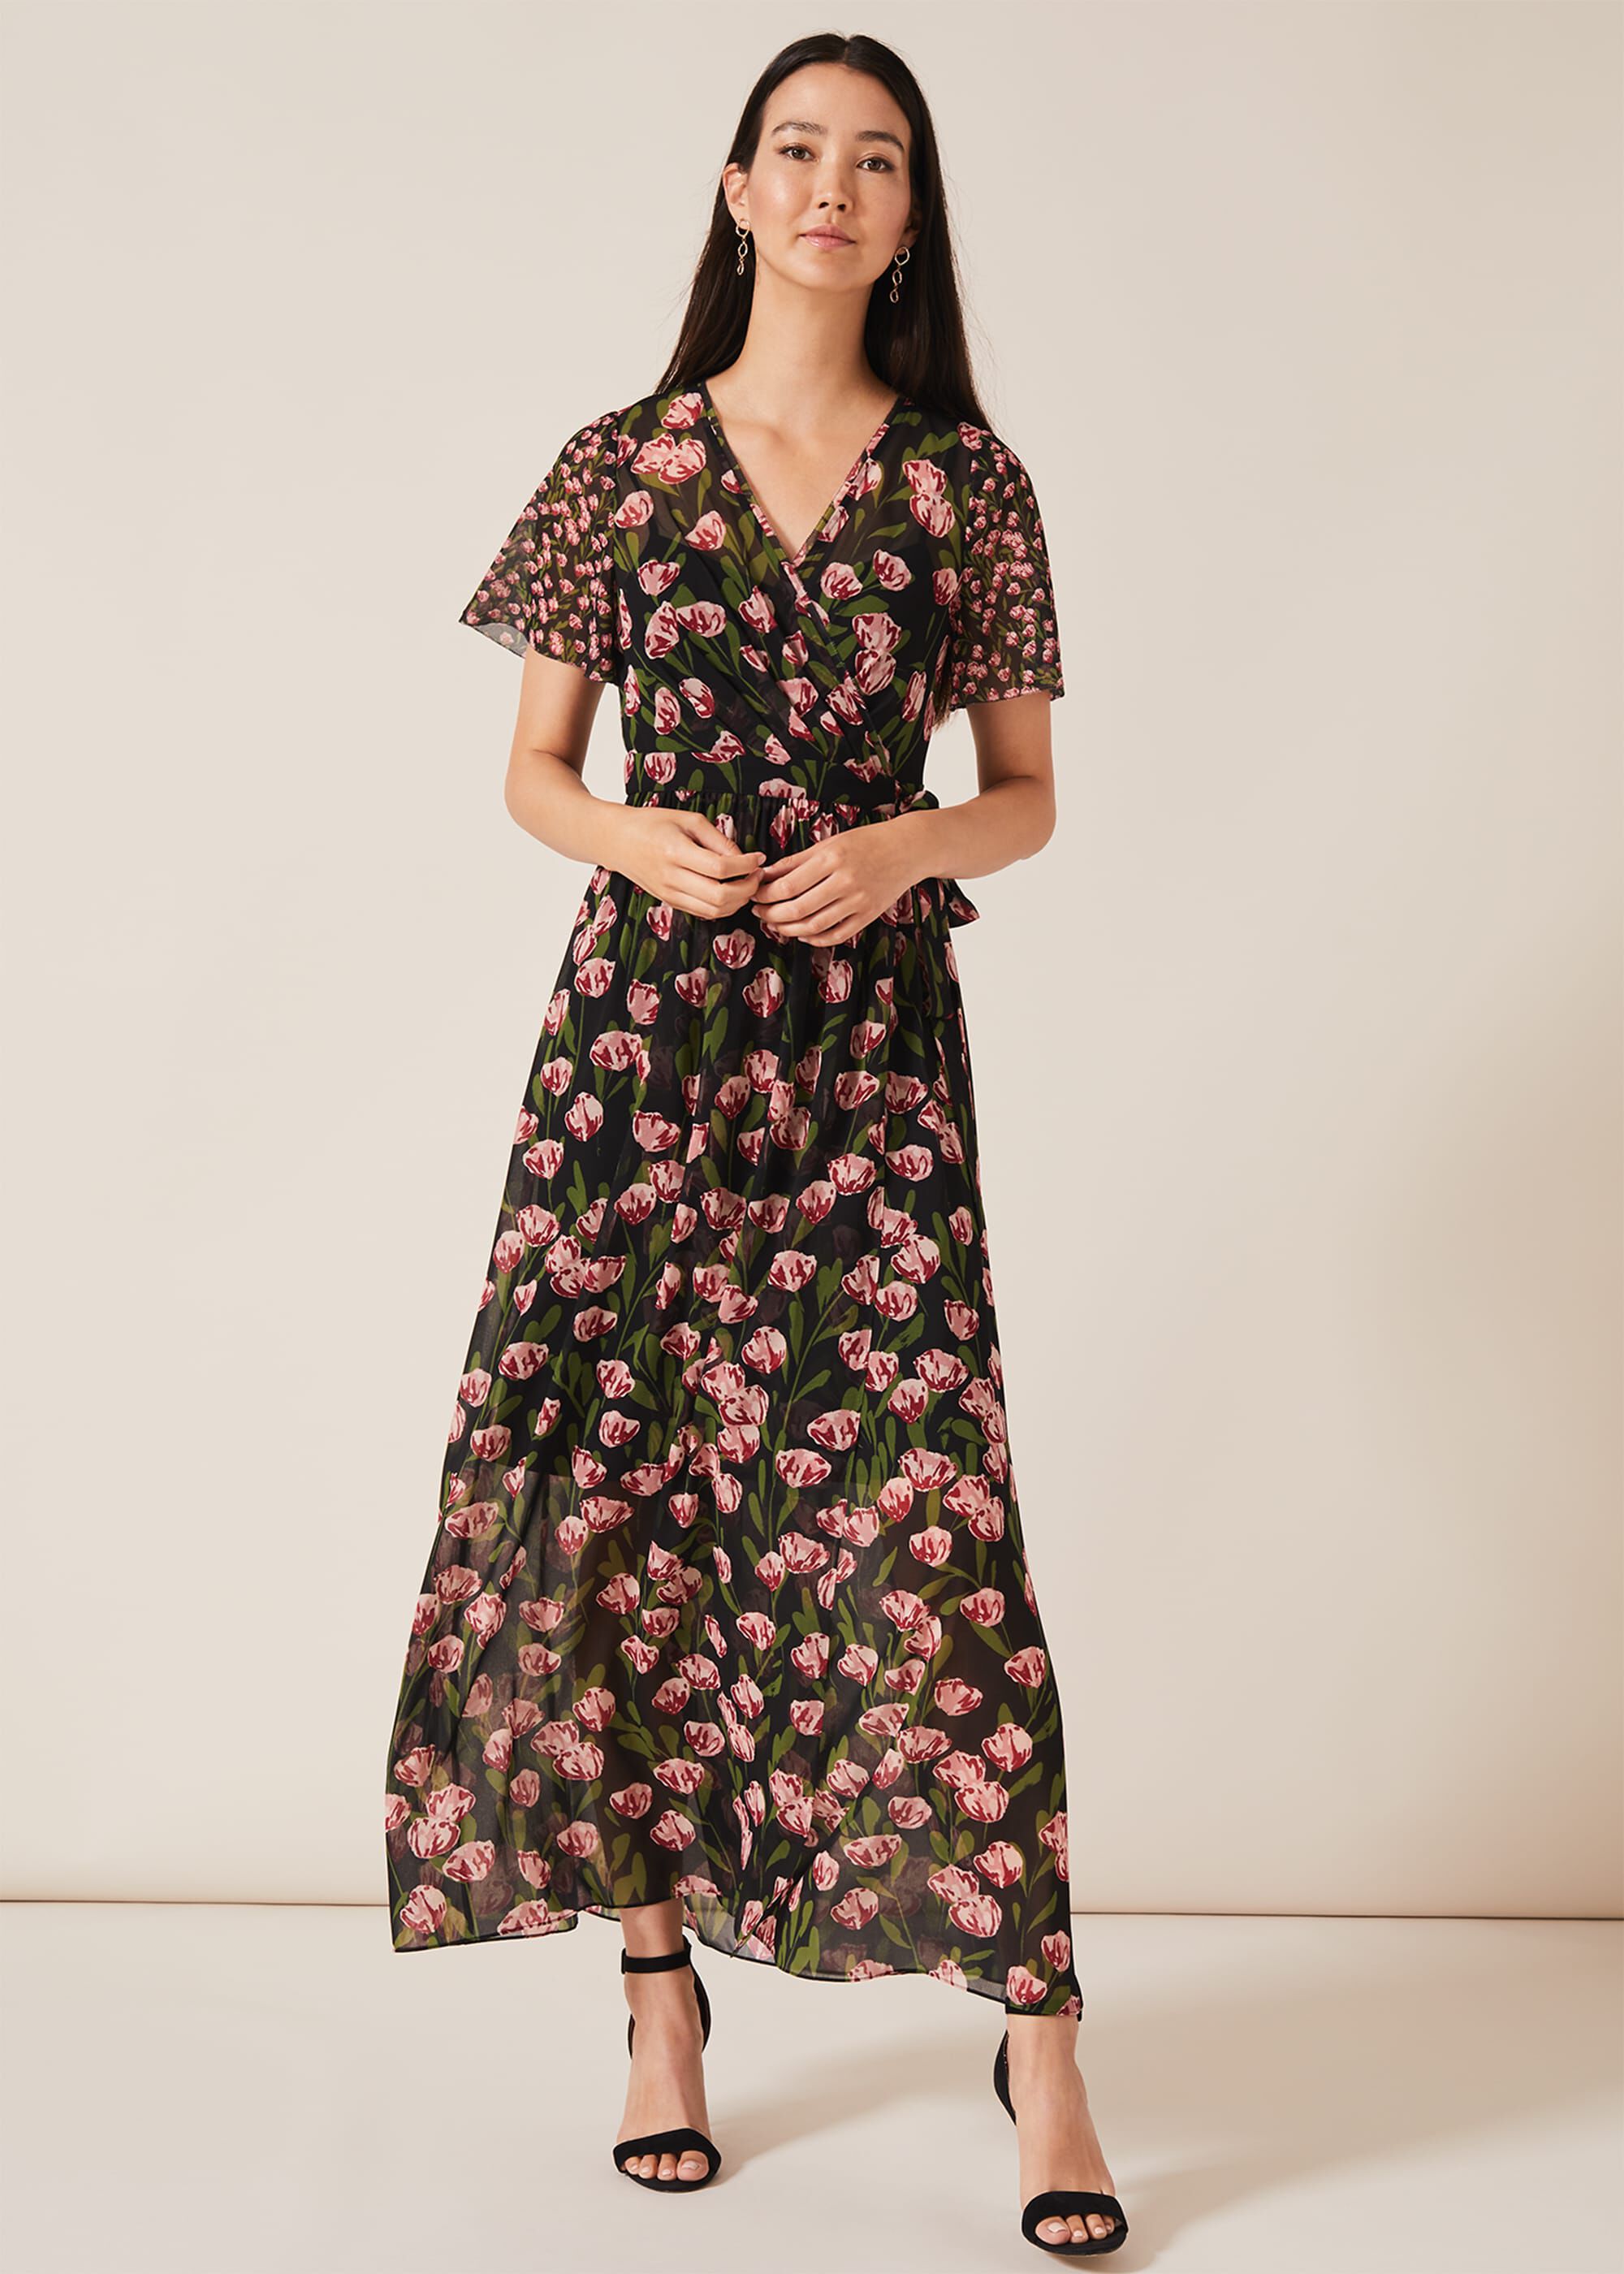 Phase Eight Maxi Deals, 59% OFF | www.aluviondecascante.com